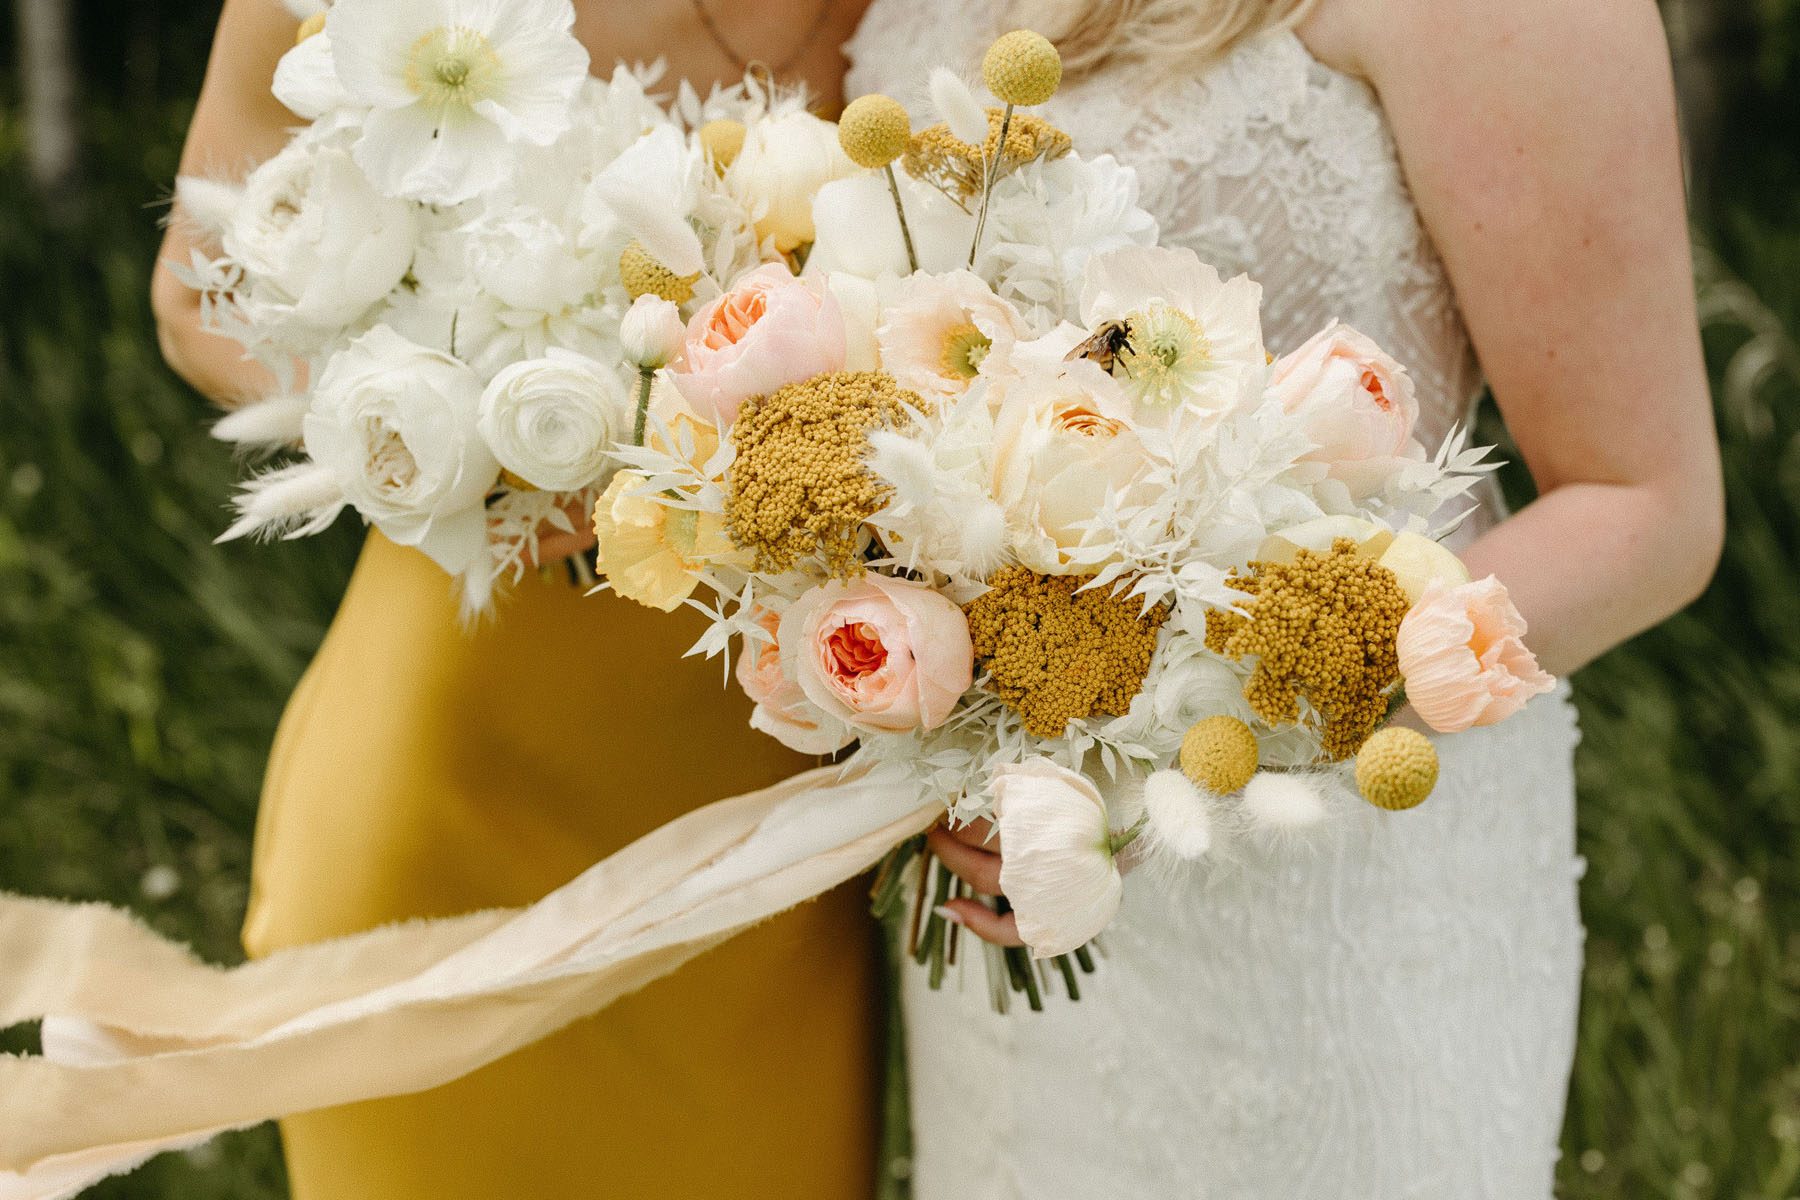 Mustard yellow bouquet with blush and white florals and feathers